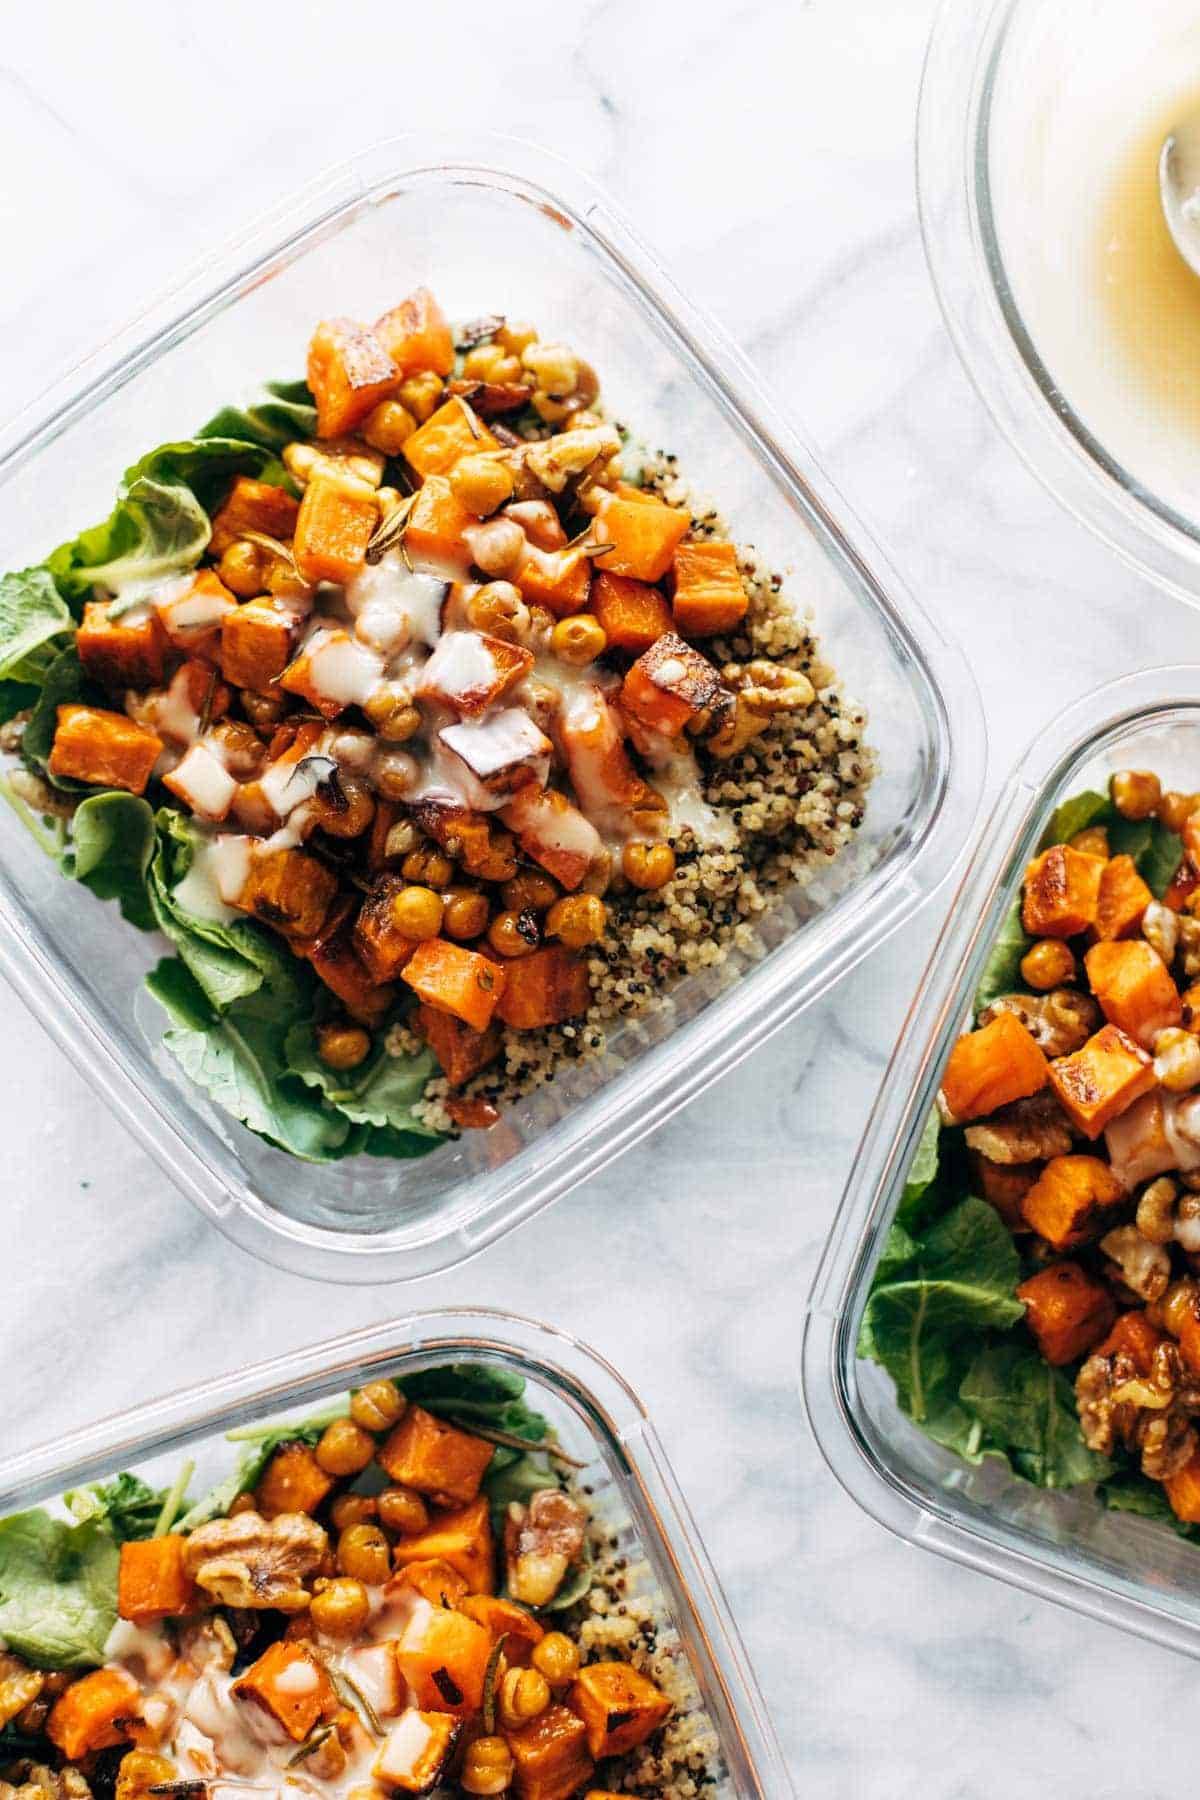 Quinoa sweet potato salad in meal prep containers.